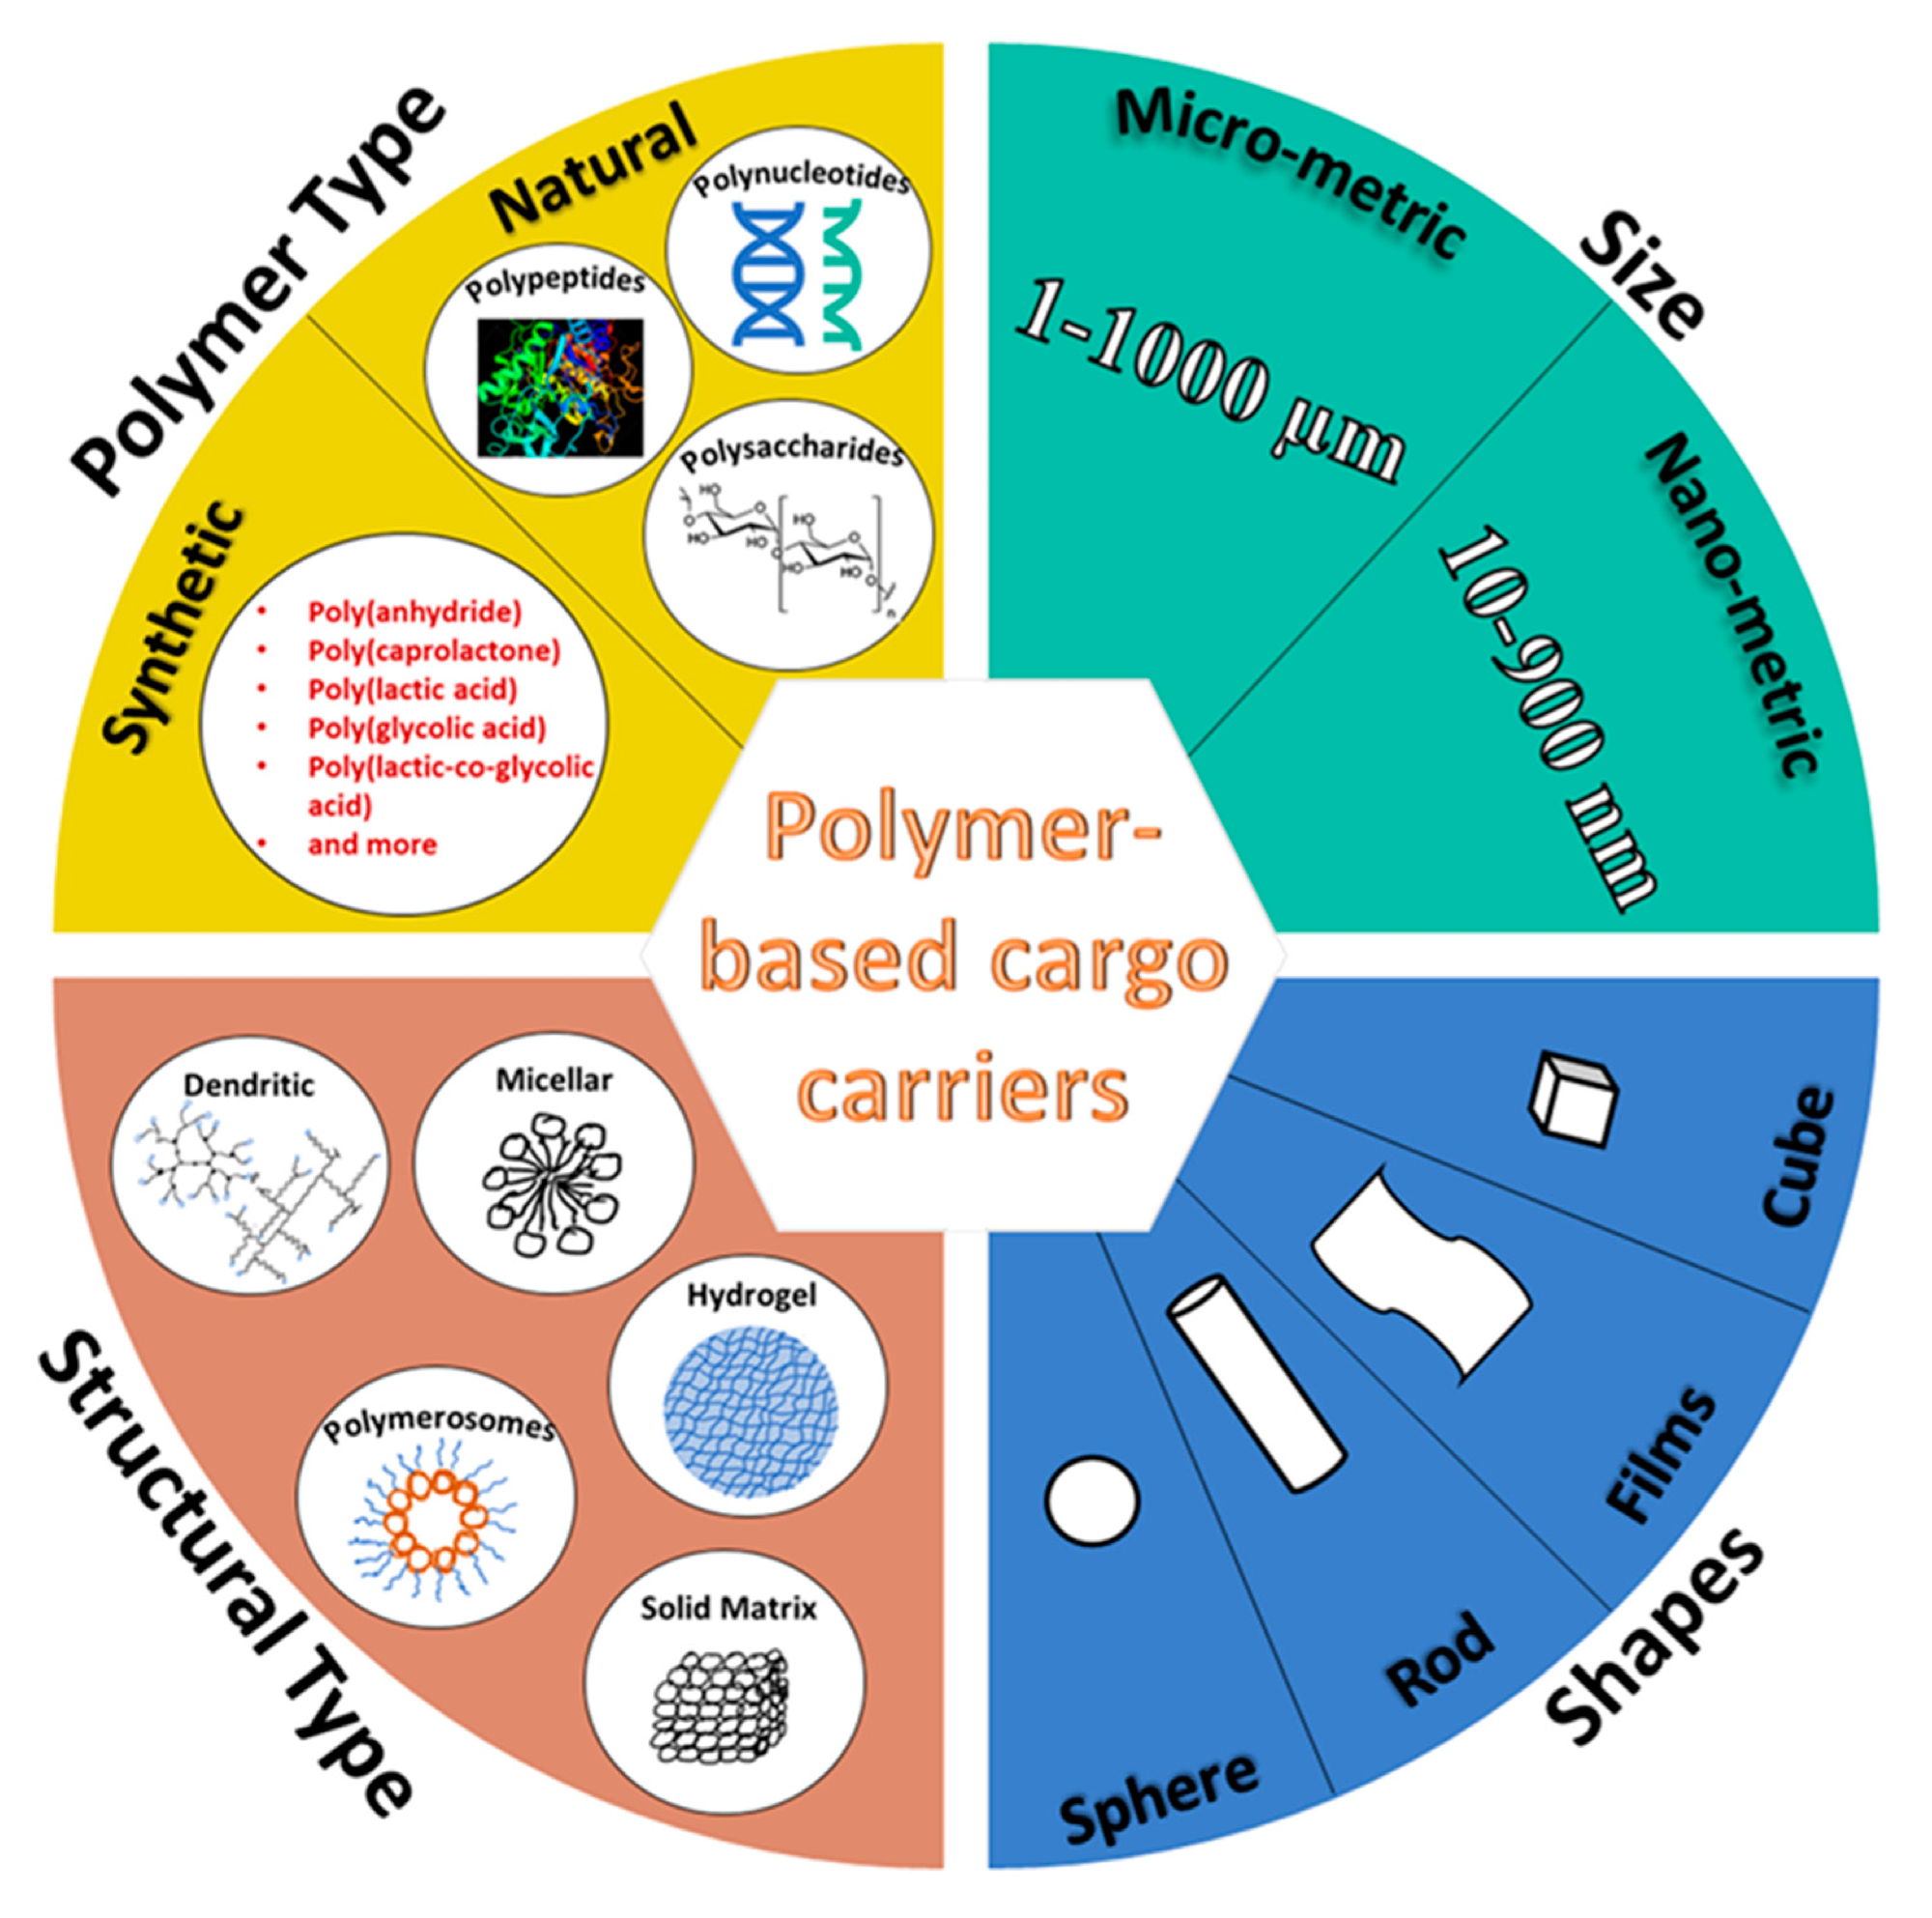 Classification of polymer-based carriers of biomedical cargo.